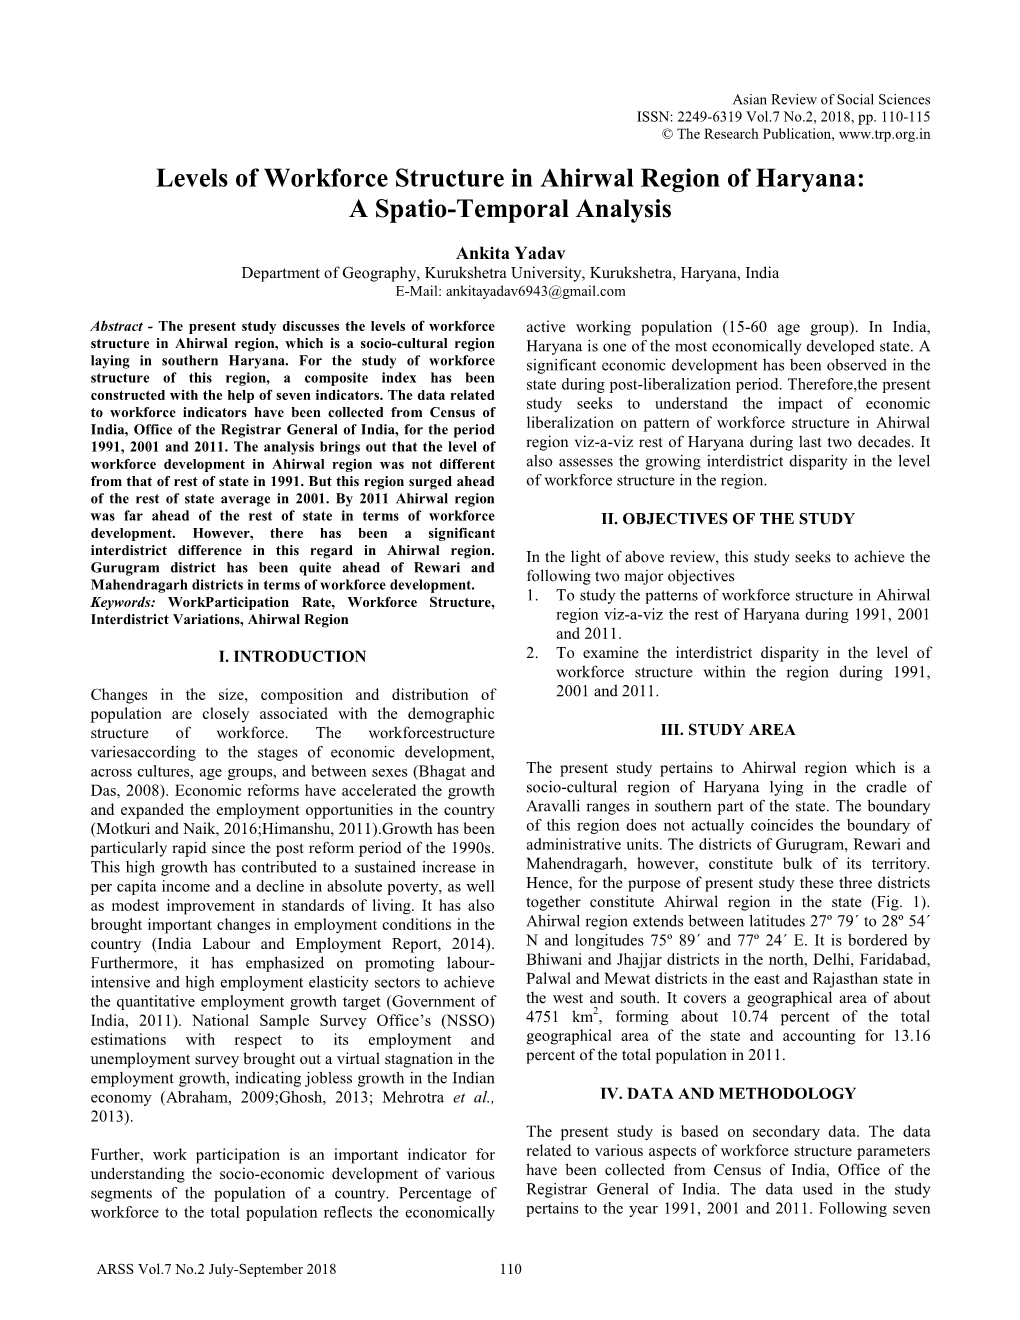 Levels of Workforce Structure in Ahirwal Region of Haryana: a Spatio-Temporal Analysis